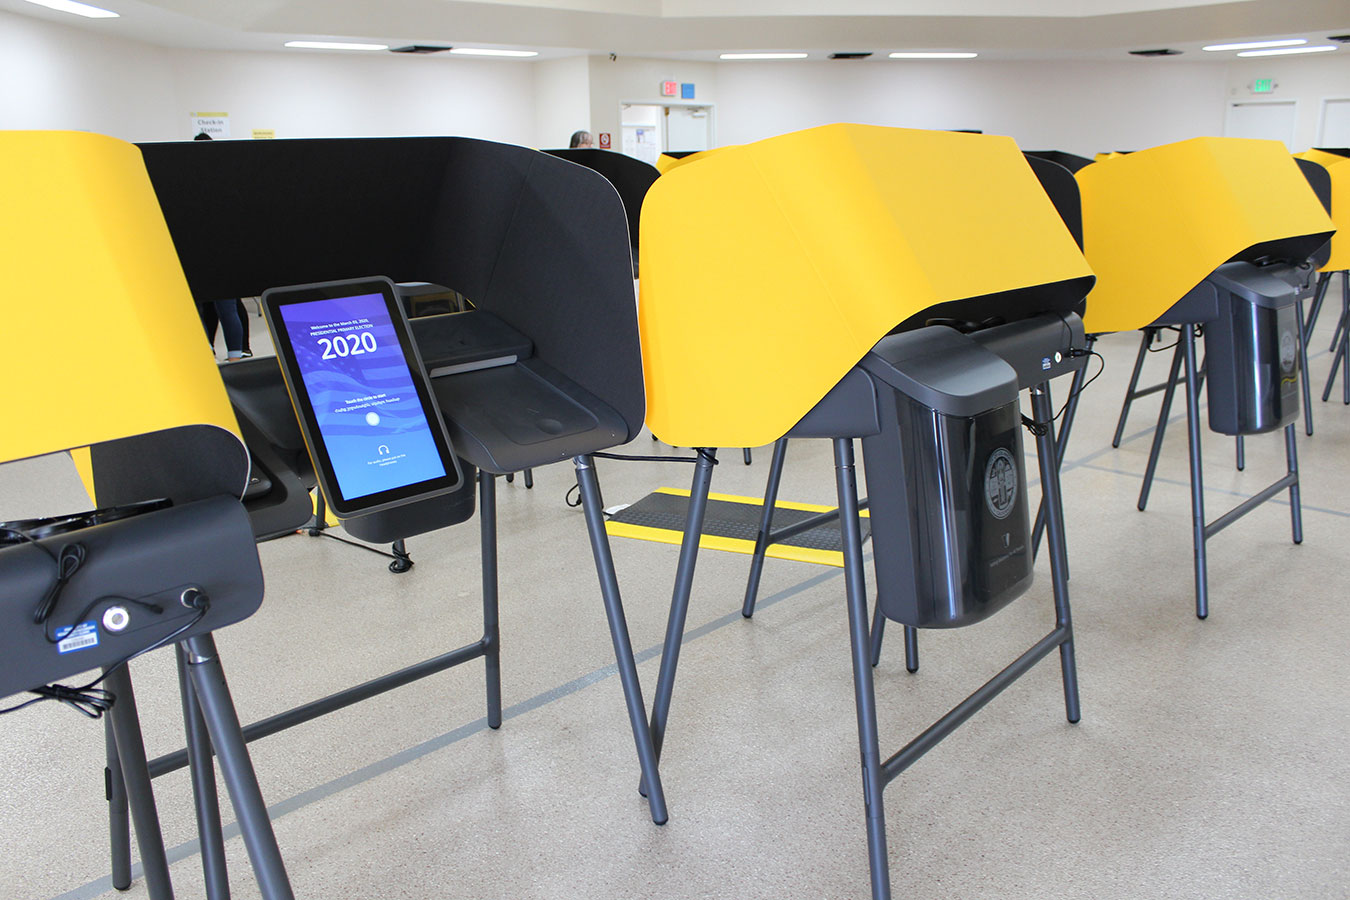 Early in-person voting for the 15 Voter’s Choice Act counties began February 22. This voting center in Mission Hills, California, has 40 touch-screen voting machines available.